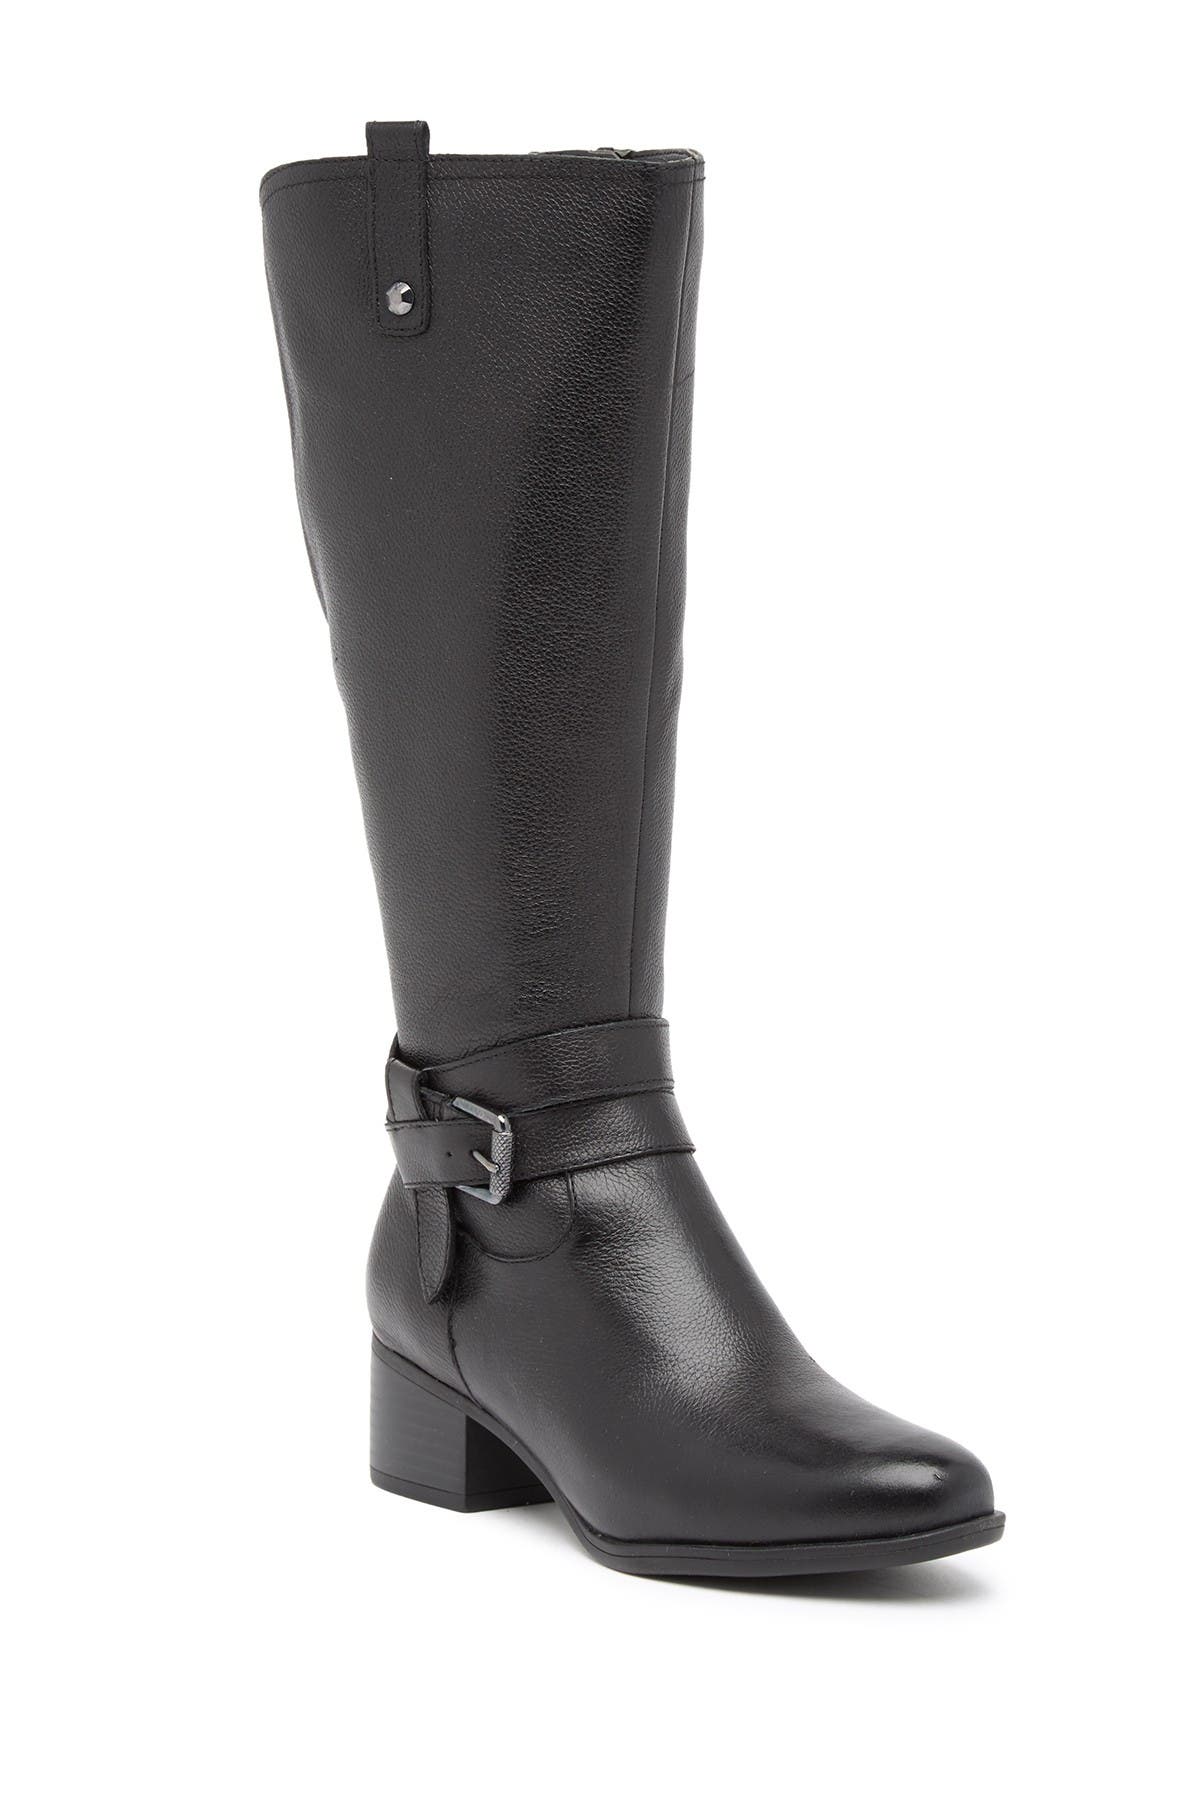 naturalizer winter boots wide width